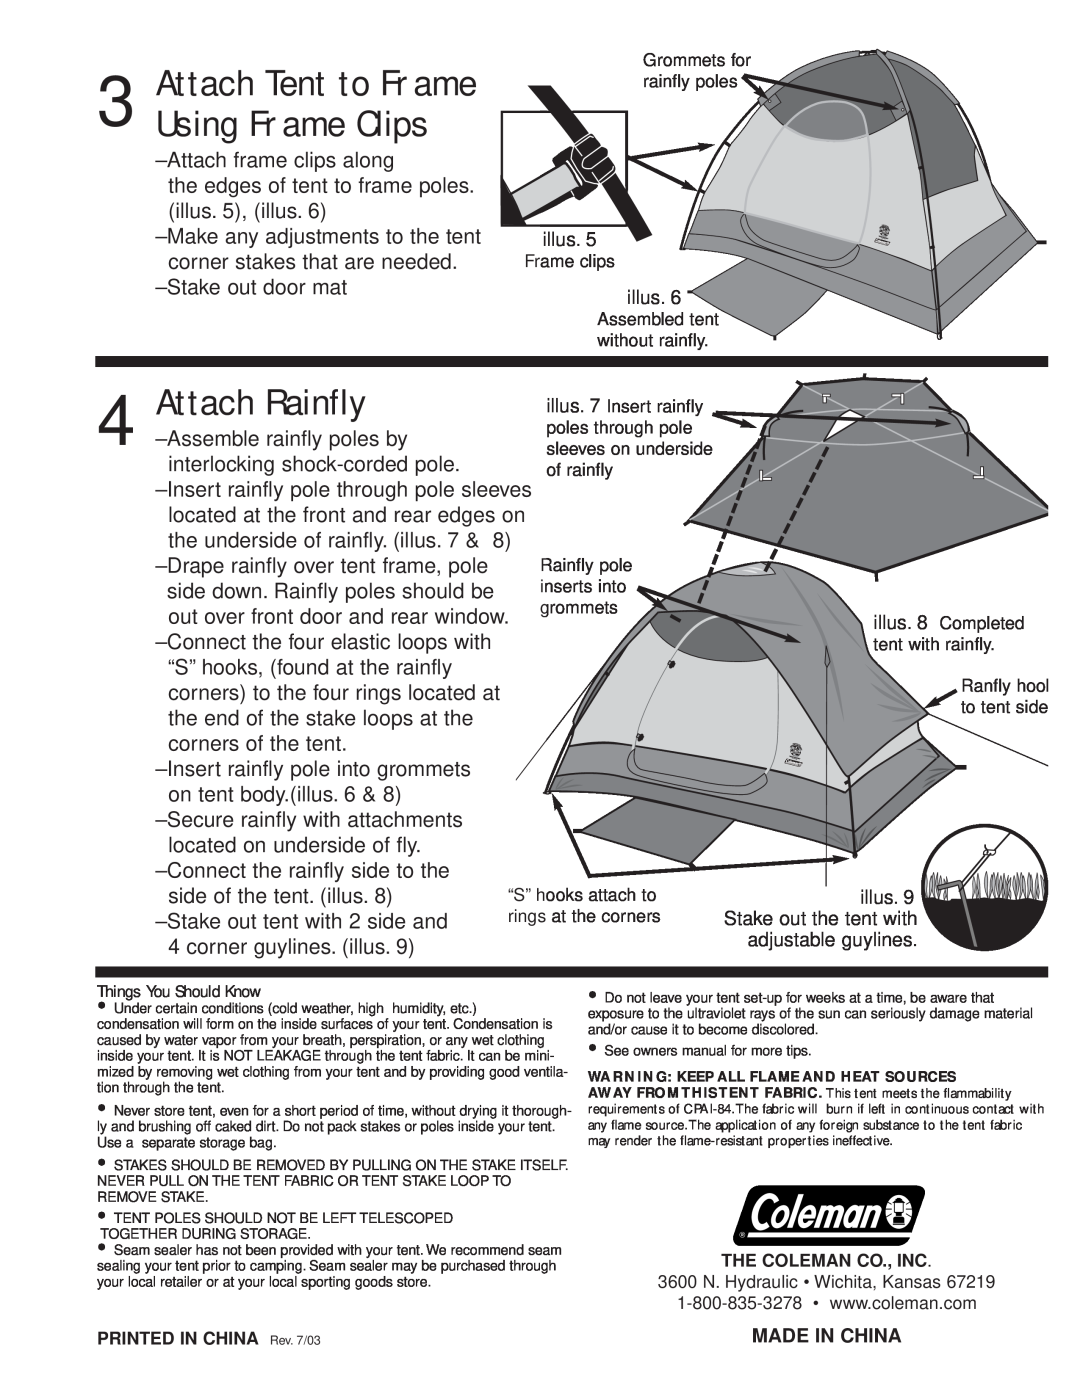 Coleman 13 x 11 owner manual Attach Tent to Frame Using Frame Clips, Attach Rainfly 